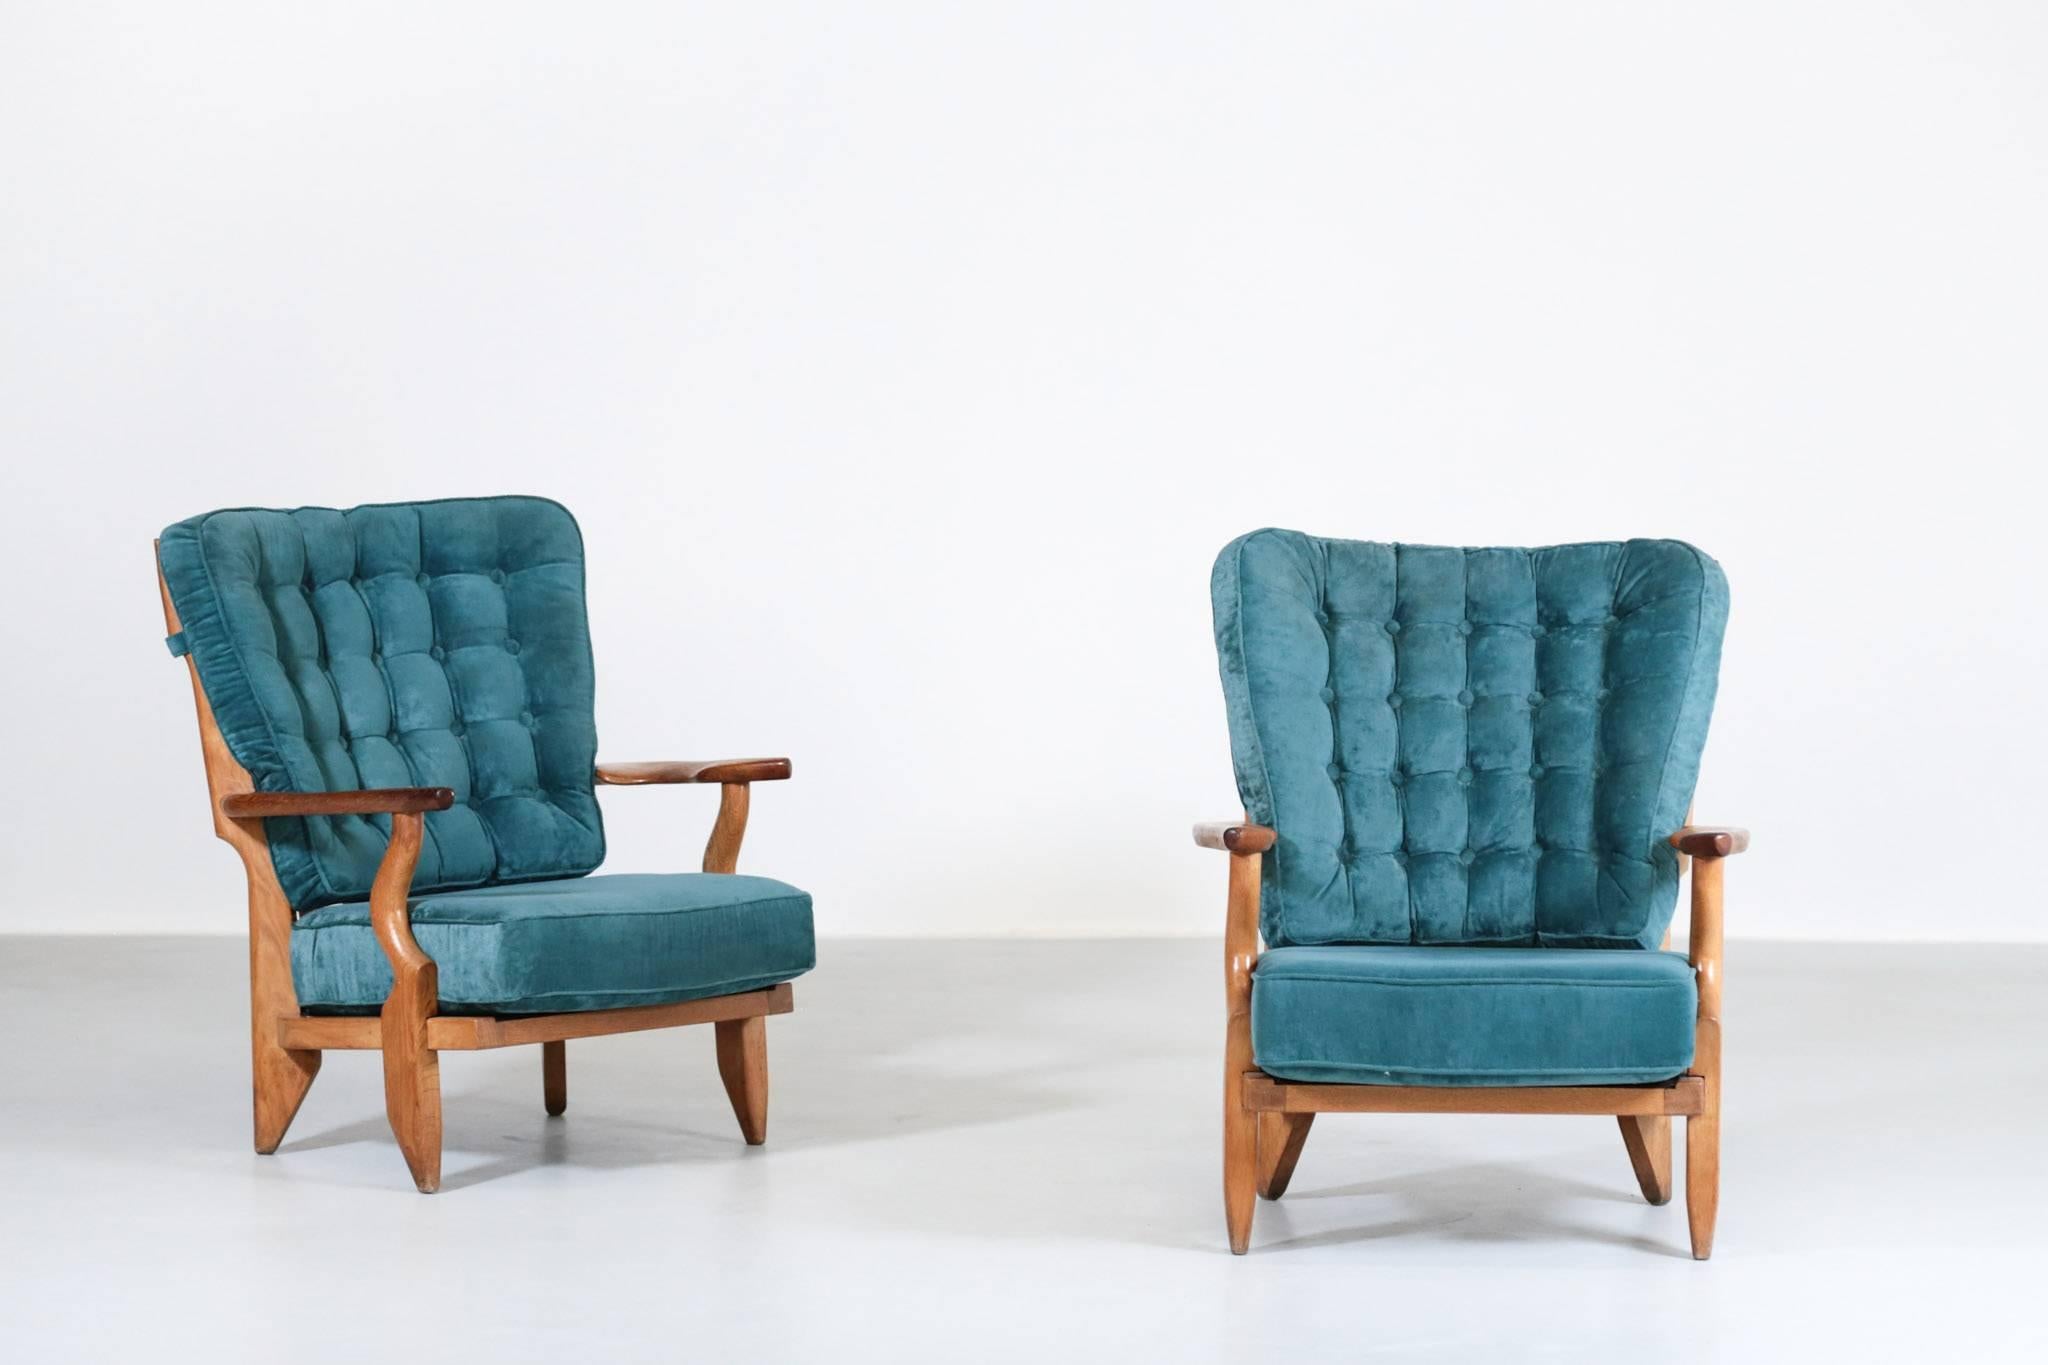 Nice design for this pair of armchairs by Guillerme et Chambron model 